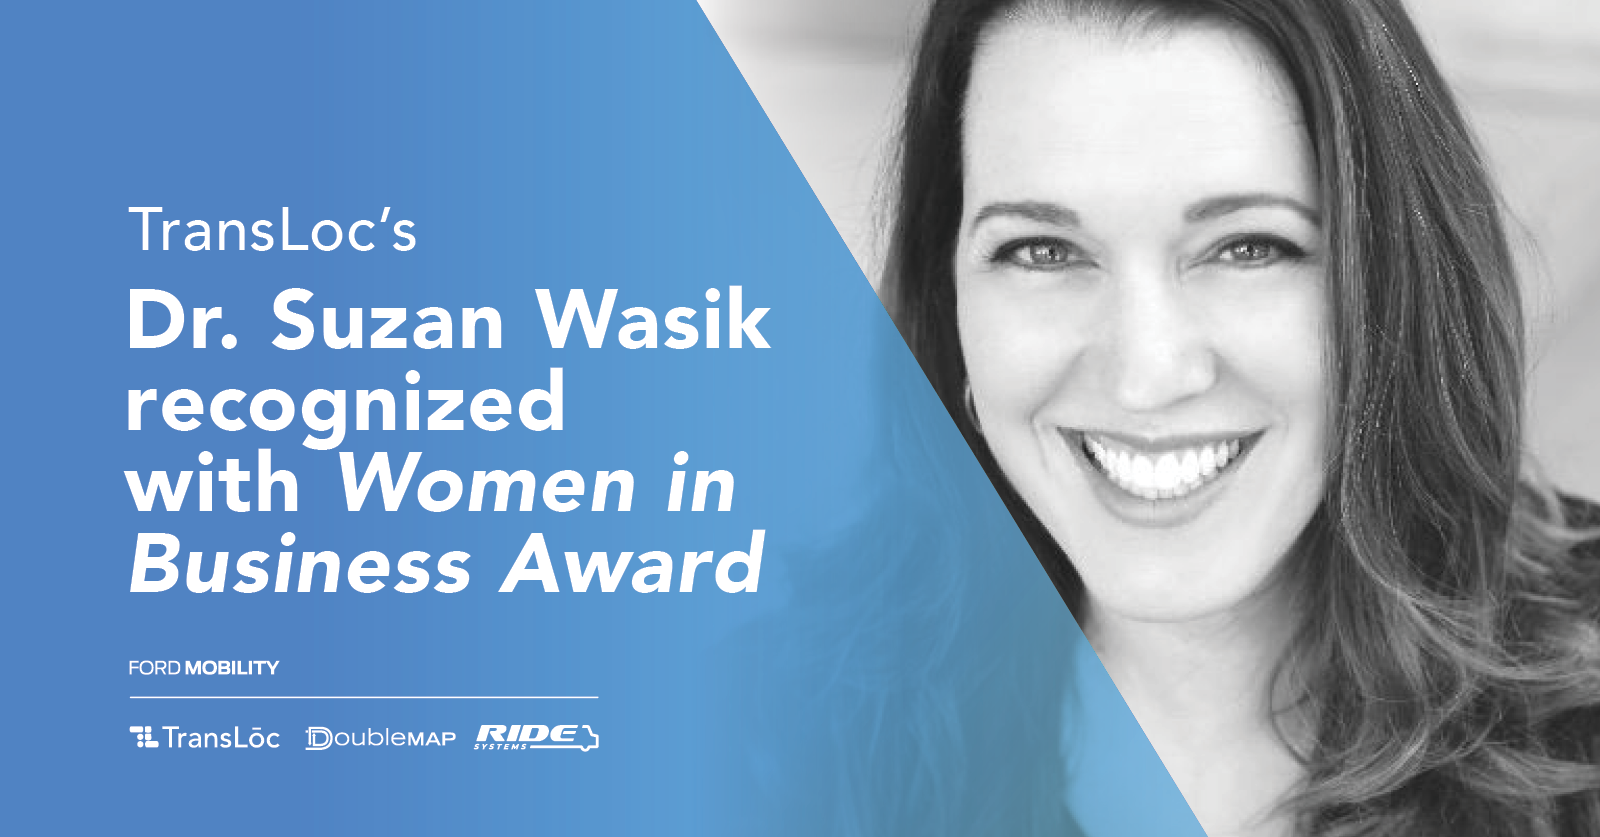 TransLoc's Dr. Suzan Wasik recognized with Women in Business Award